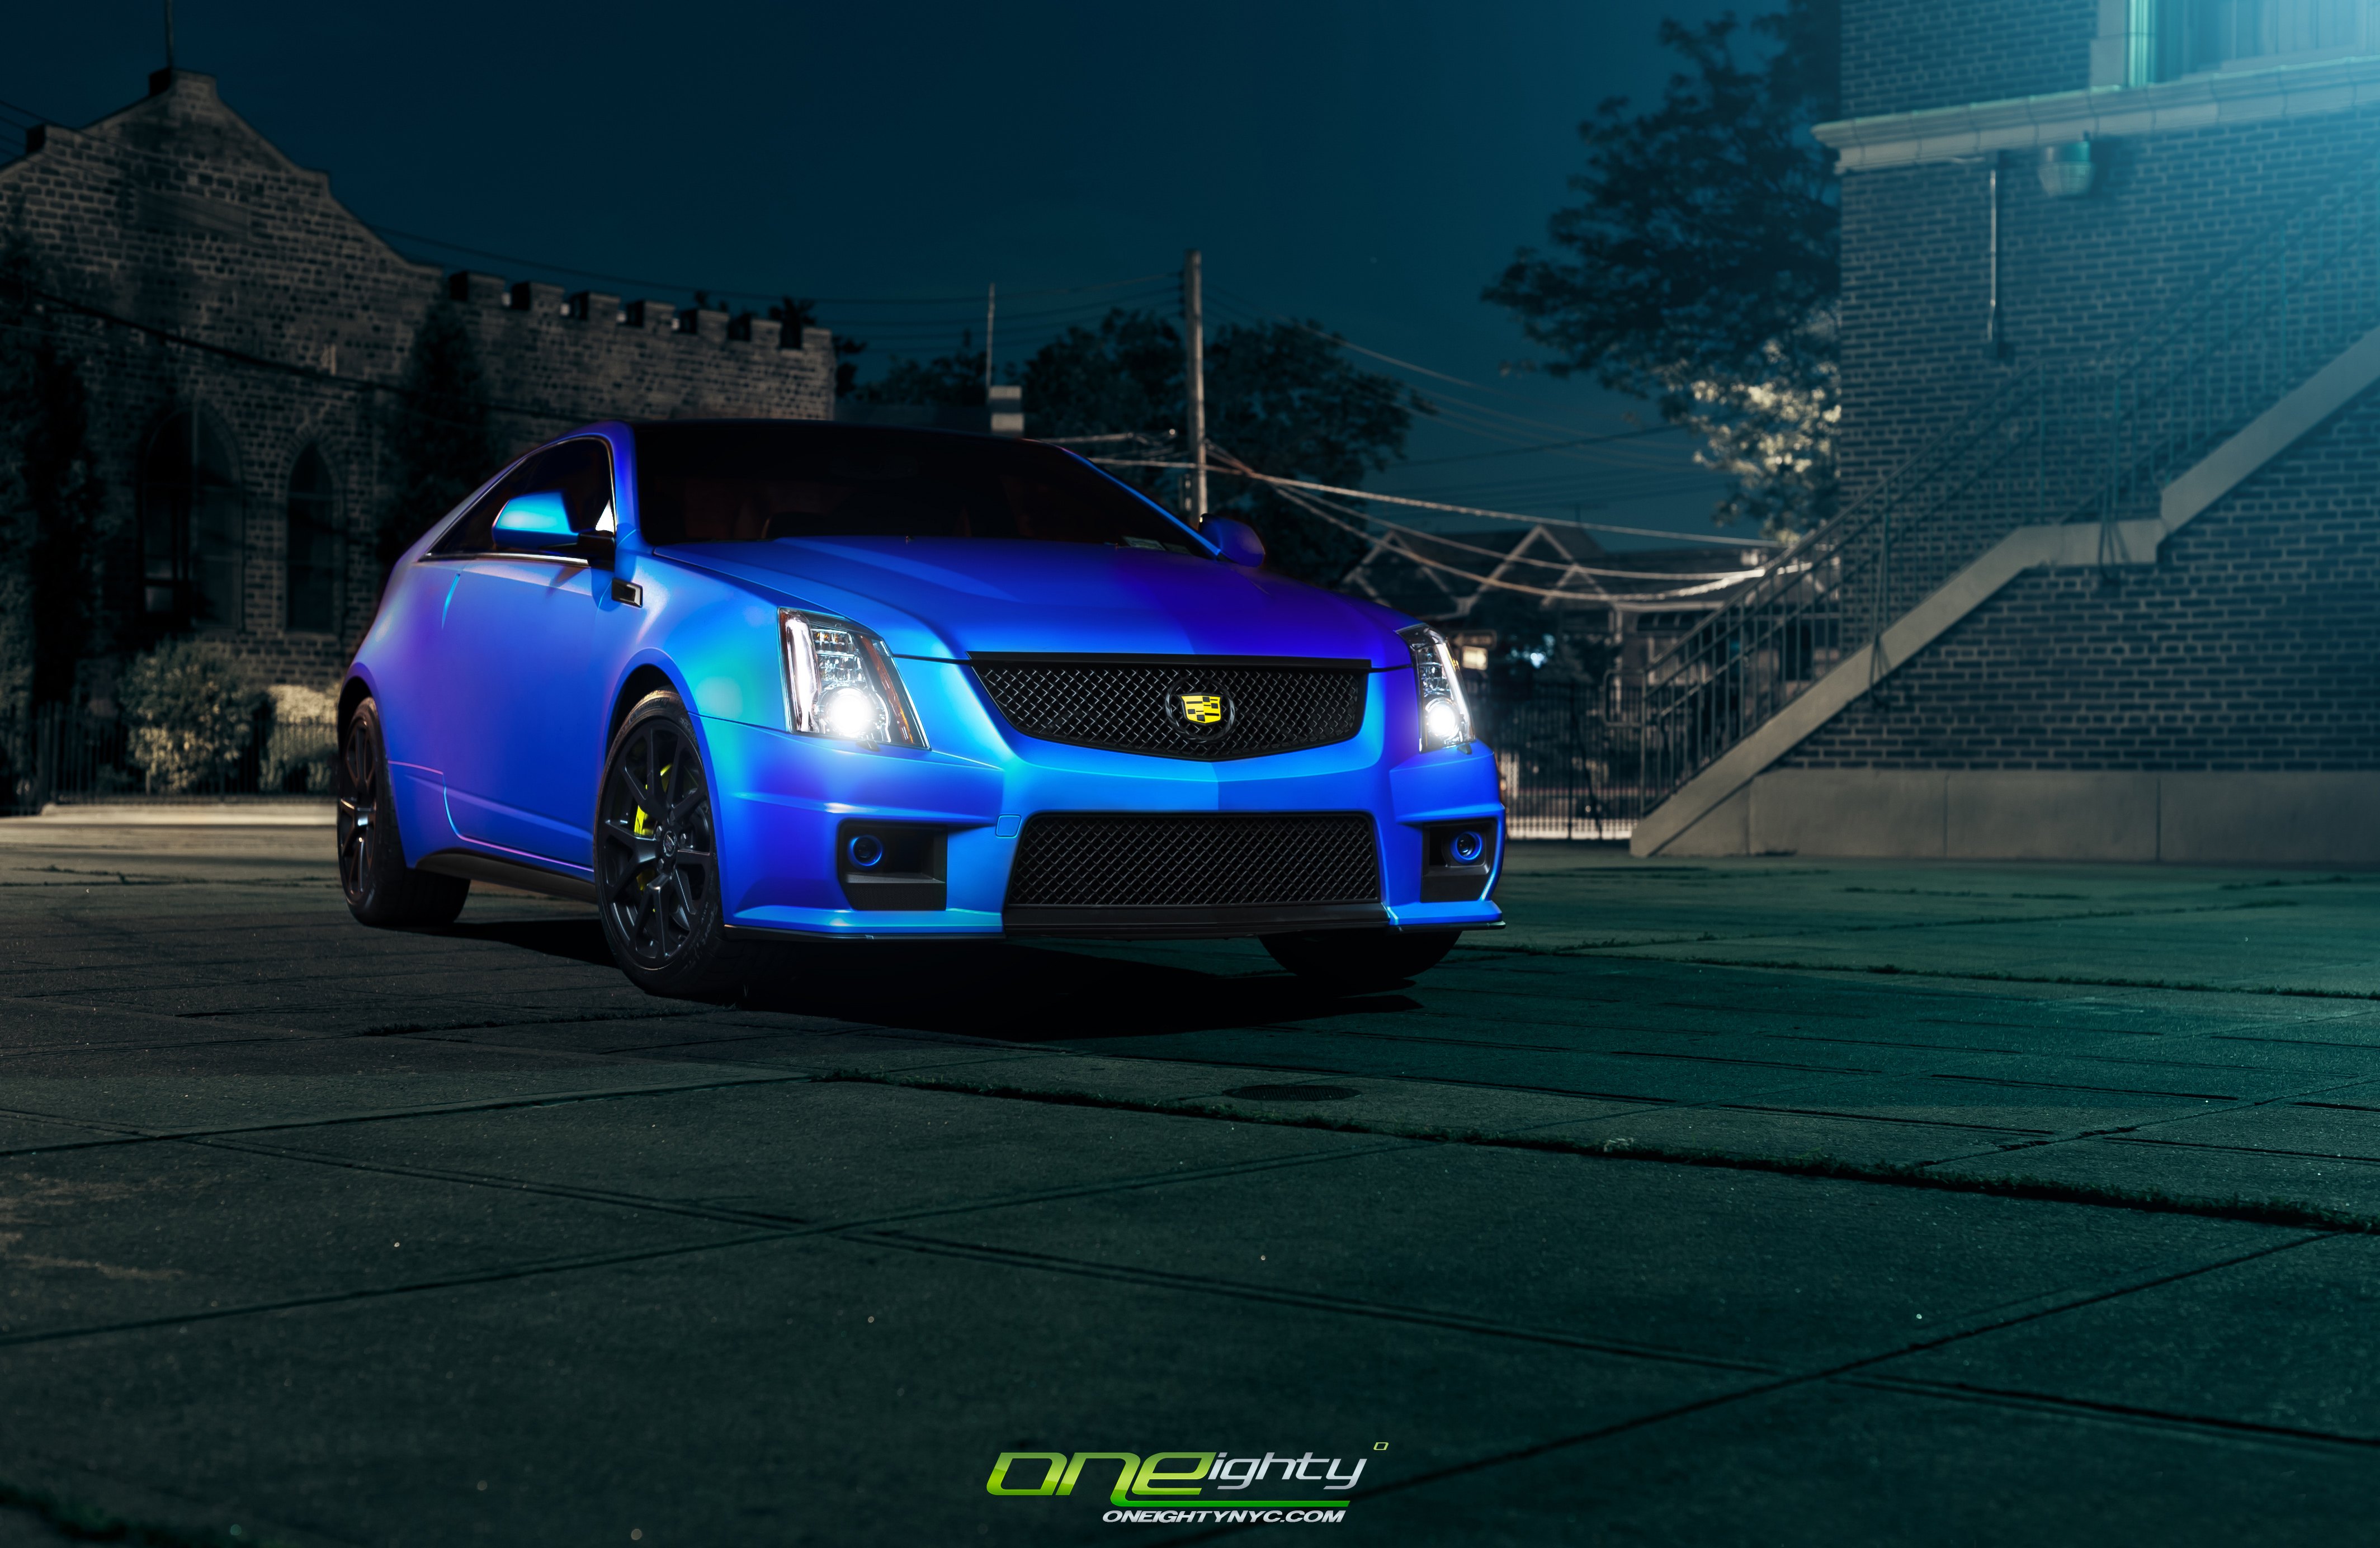 Blacked Out Mesh Grille on Blue Cadillac CTS - Photo by ONEighty NYC